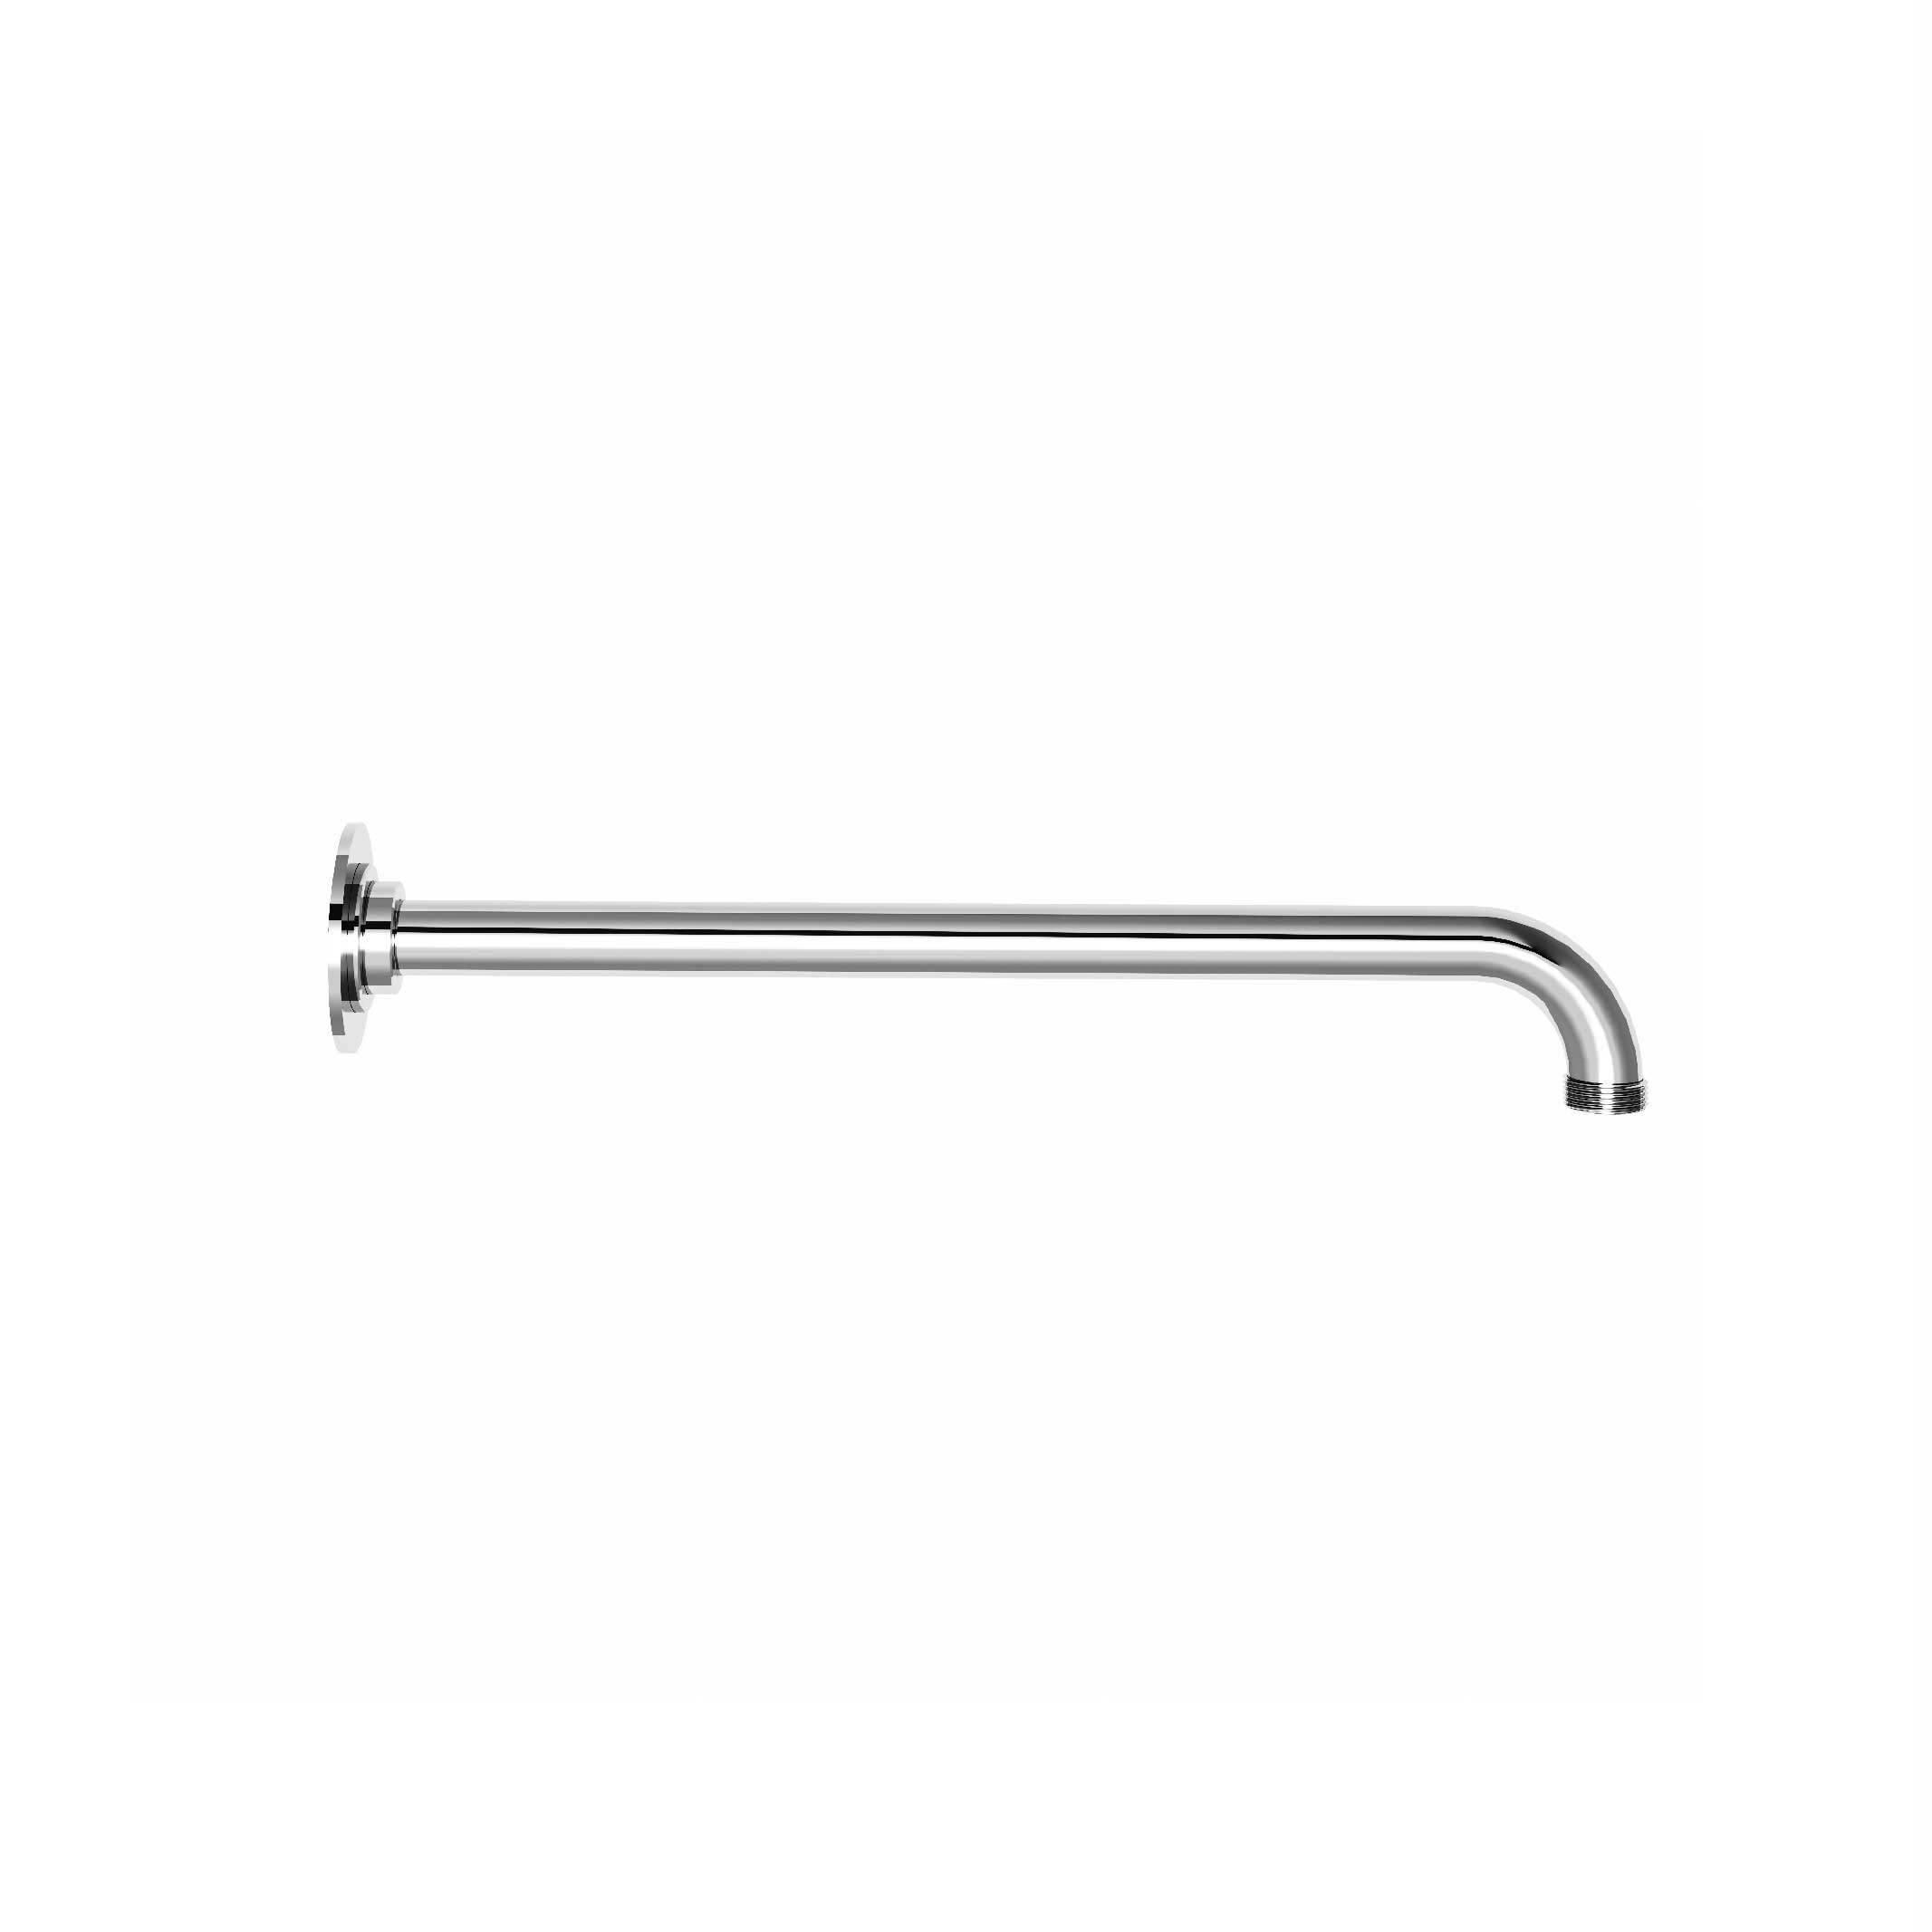 M32-2W301 Wall mounted shower arm 300mm